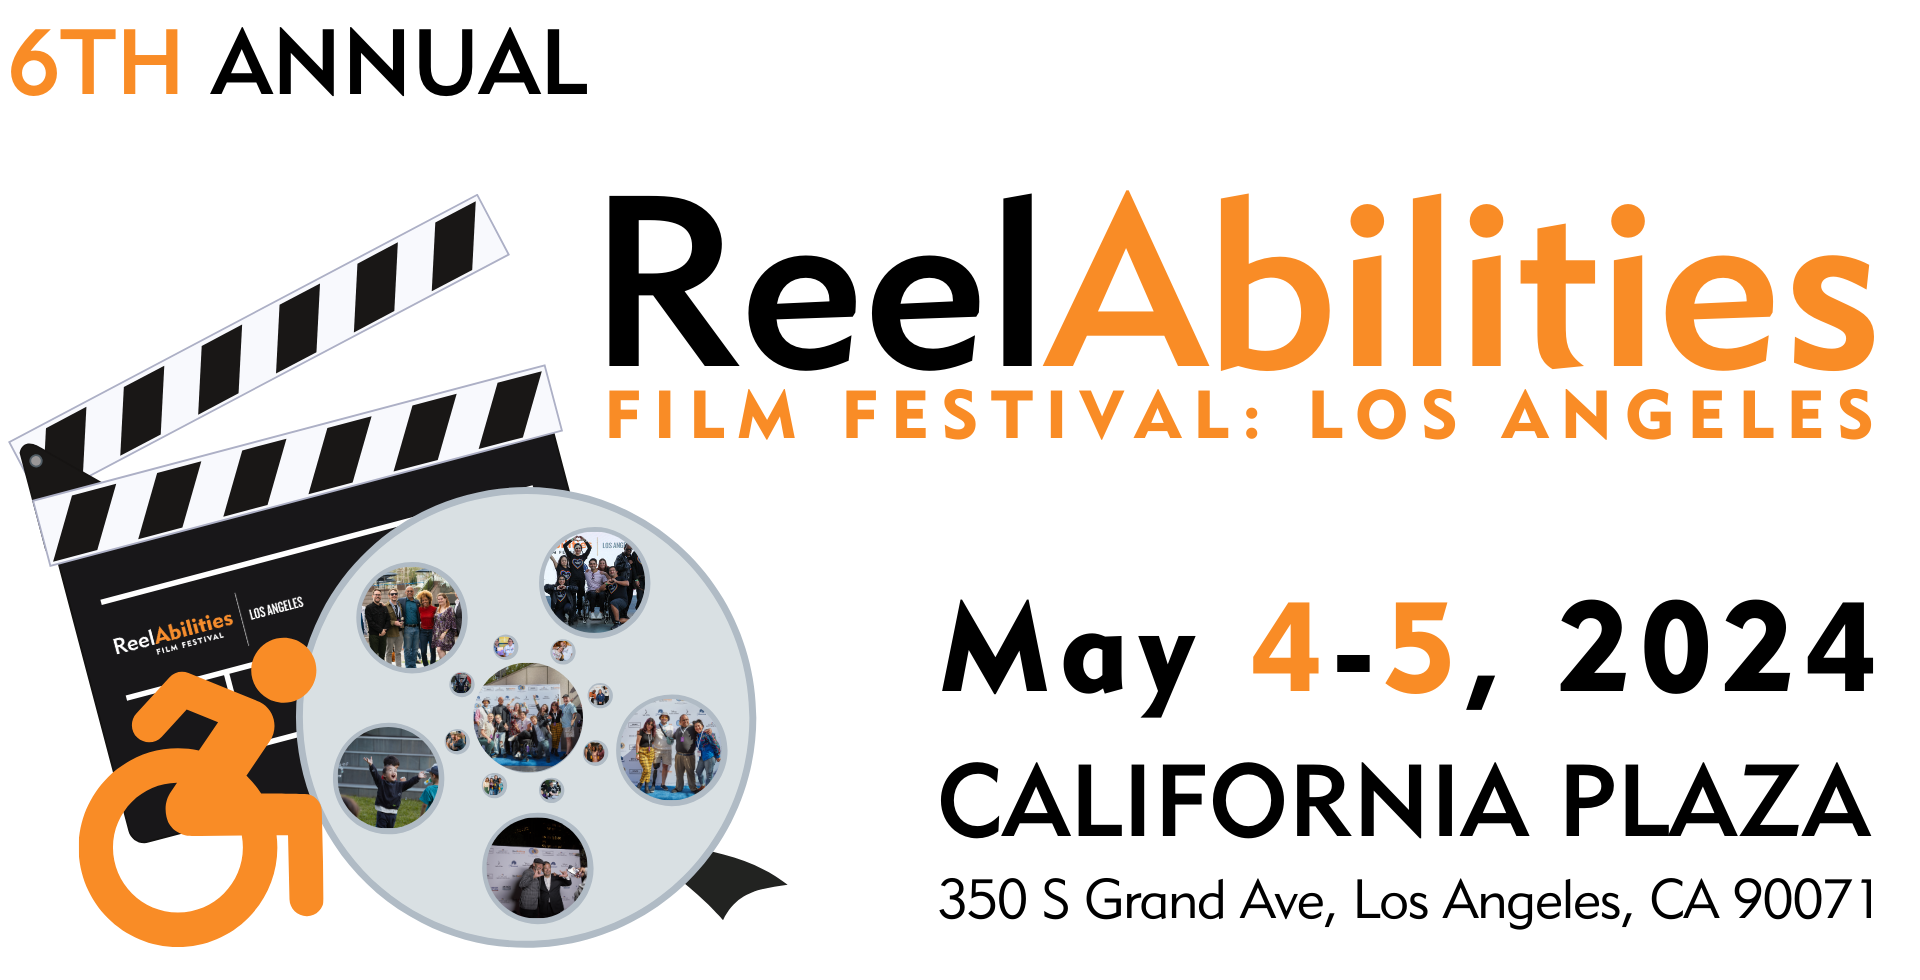 6th Annual ReelAbilities Film Festival Los Angeles. May 4th and 5th, 2024. California Plaza.